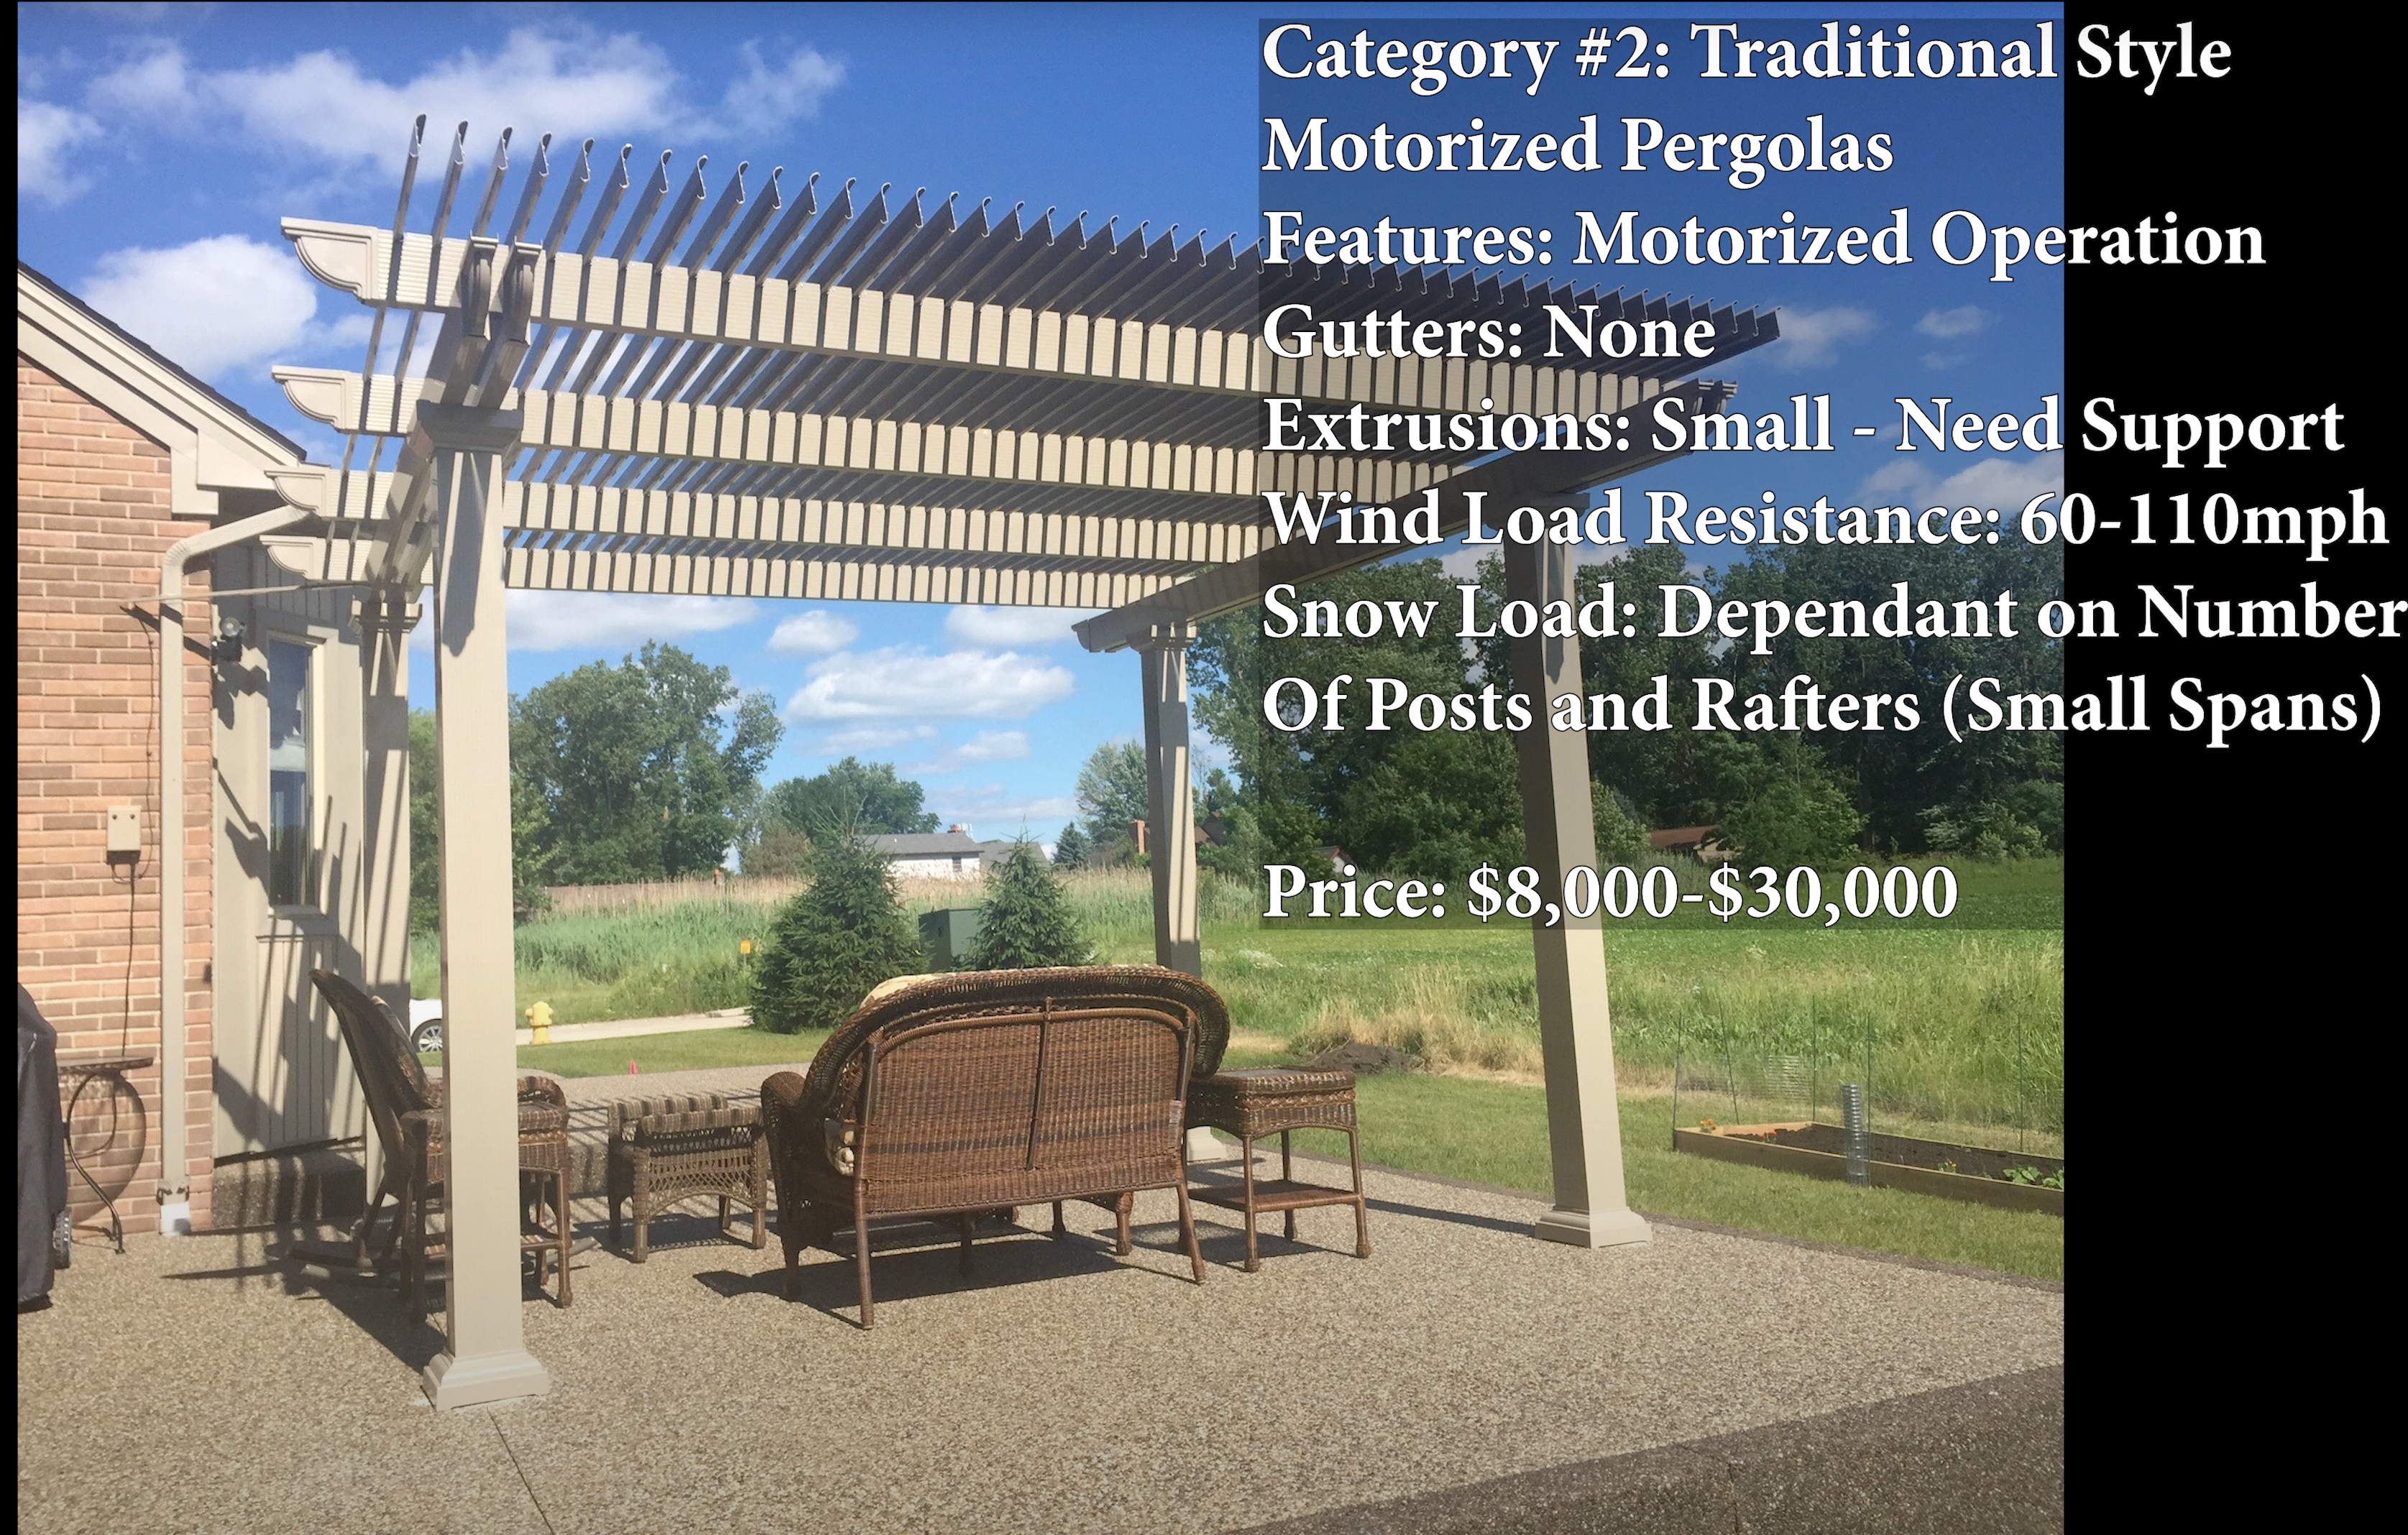 budget for investing in classic pergola that rotates